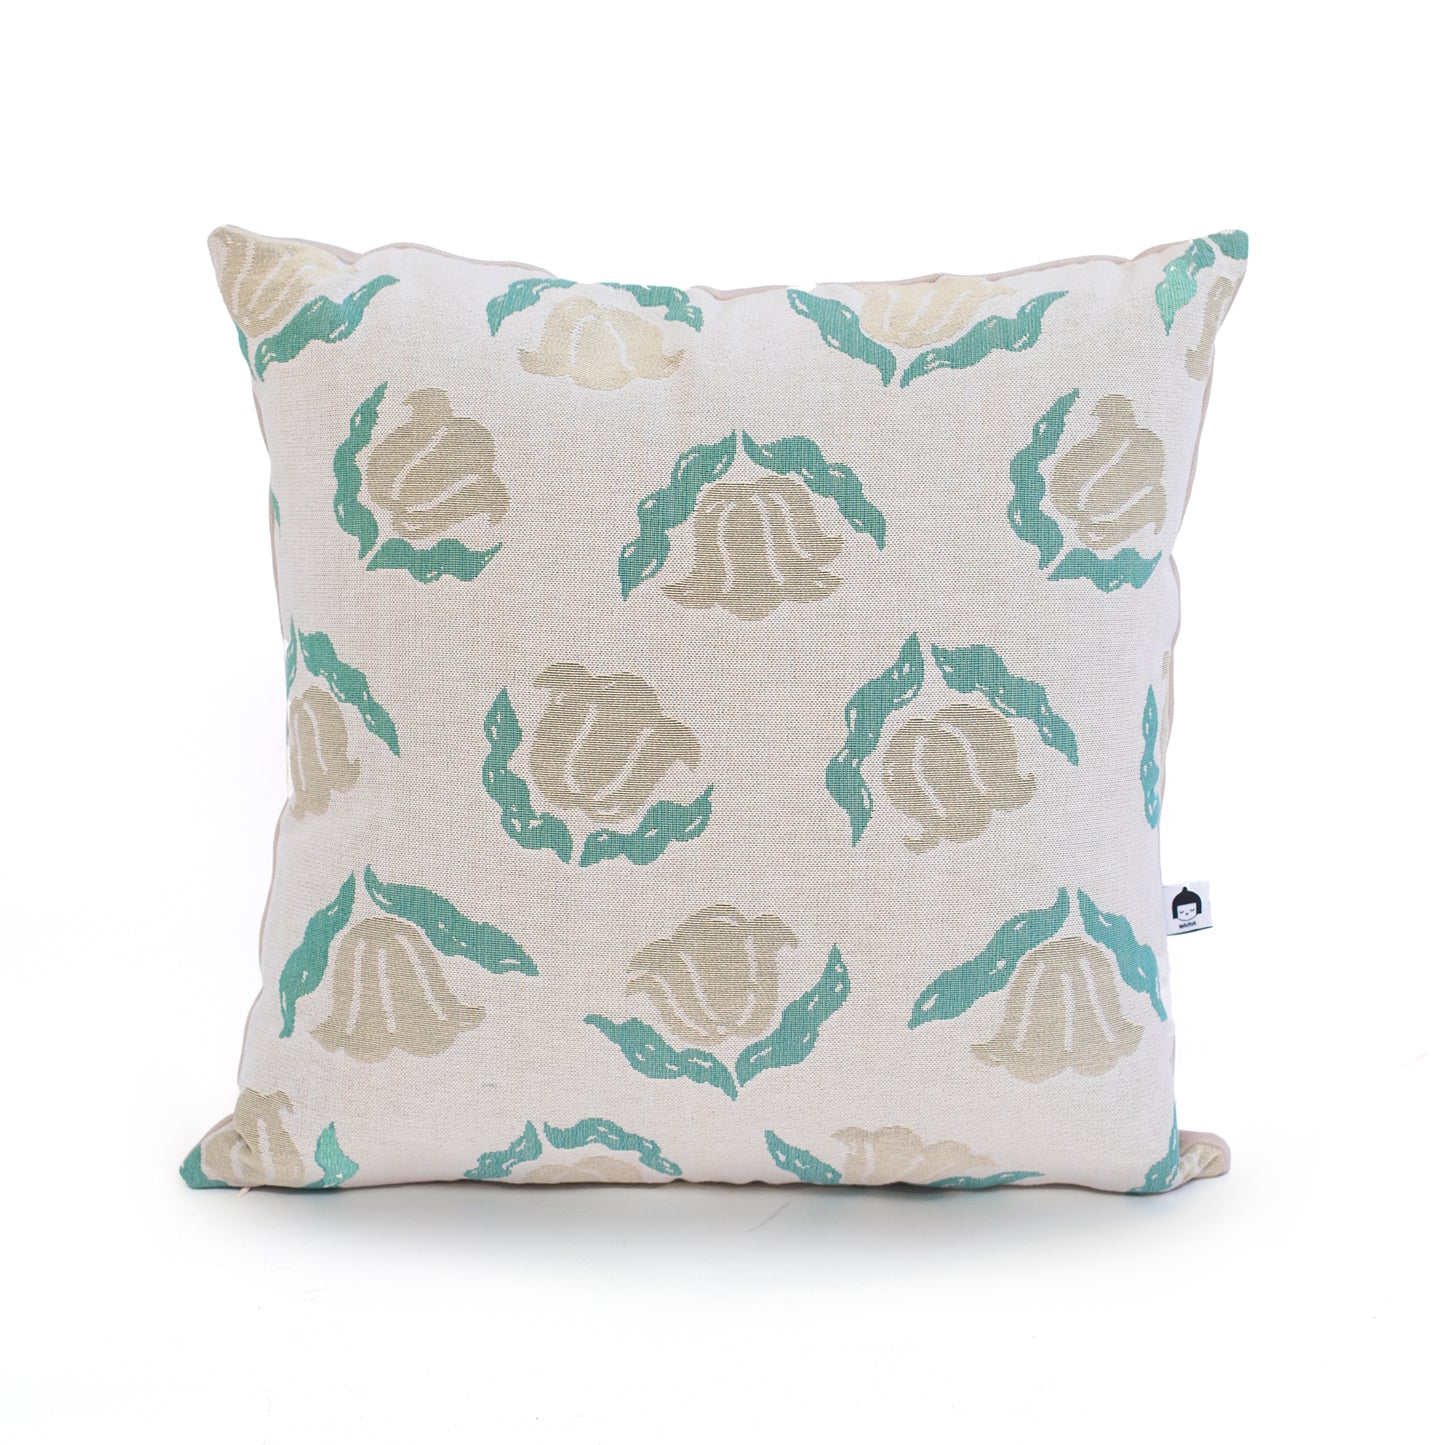 'Lily of the valley' all over cushion